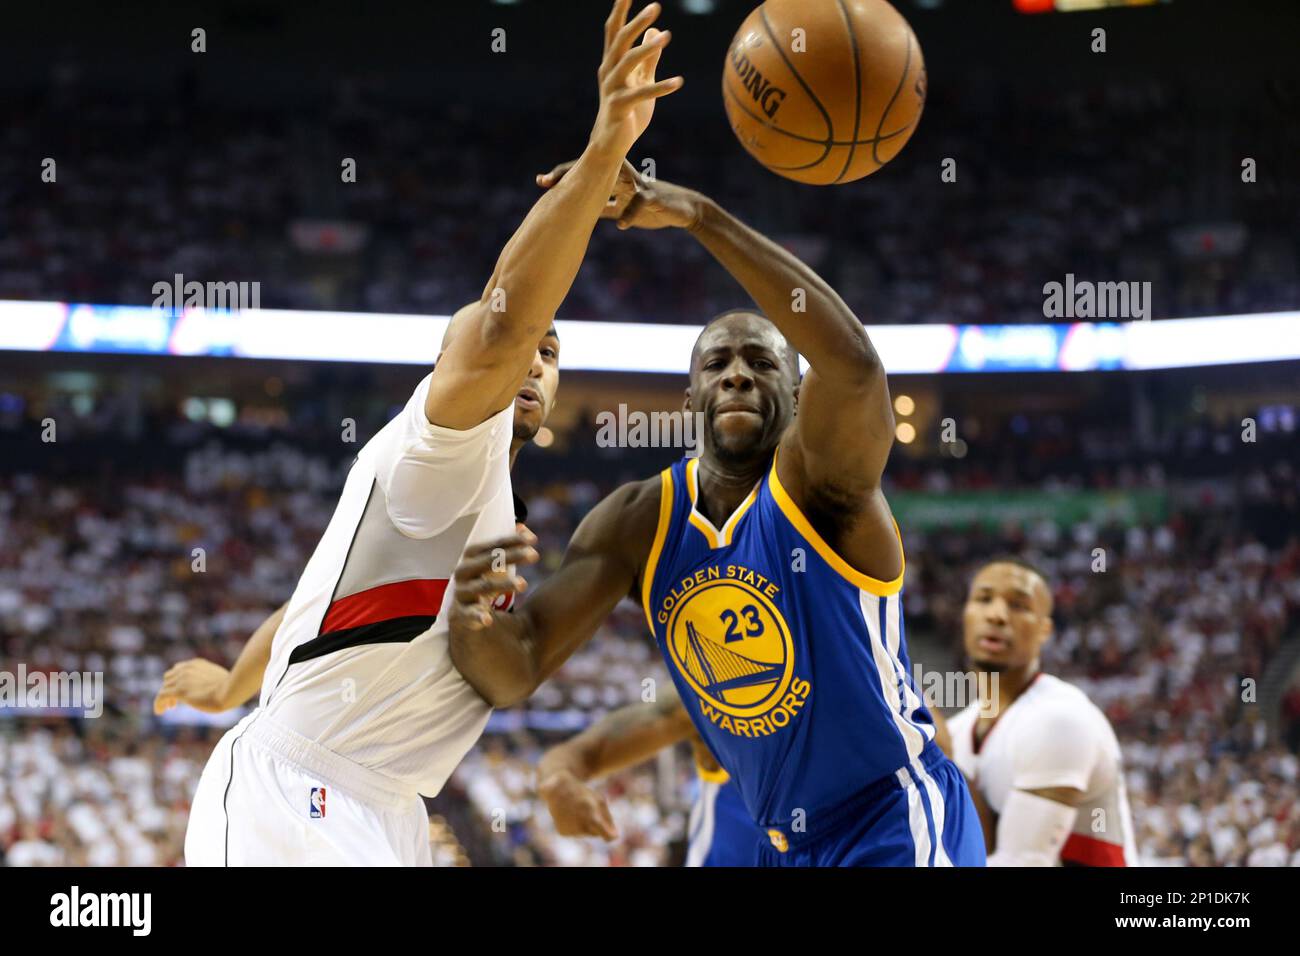 May 7, 2016 - DRAYMOND GREEN (23) gets the ball knocked away. The Portland  Trail Blazers hosted the Golden State Warriors at the Moda Center on May 7,  2016. Photo by David